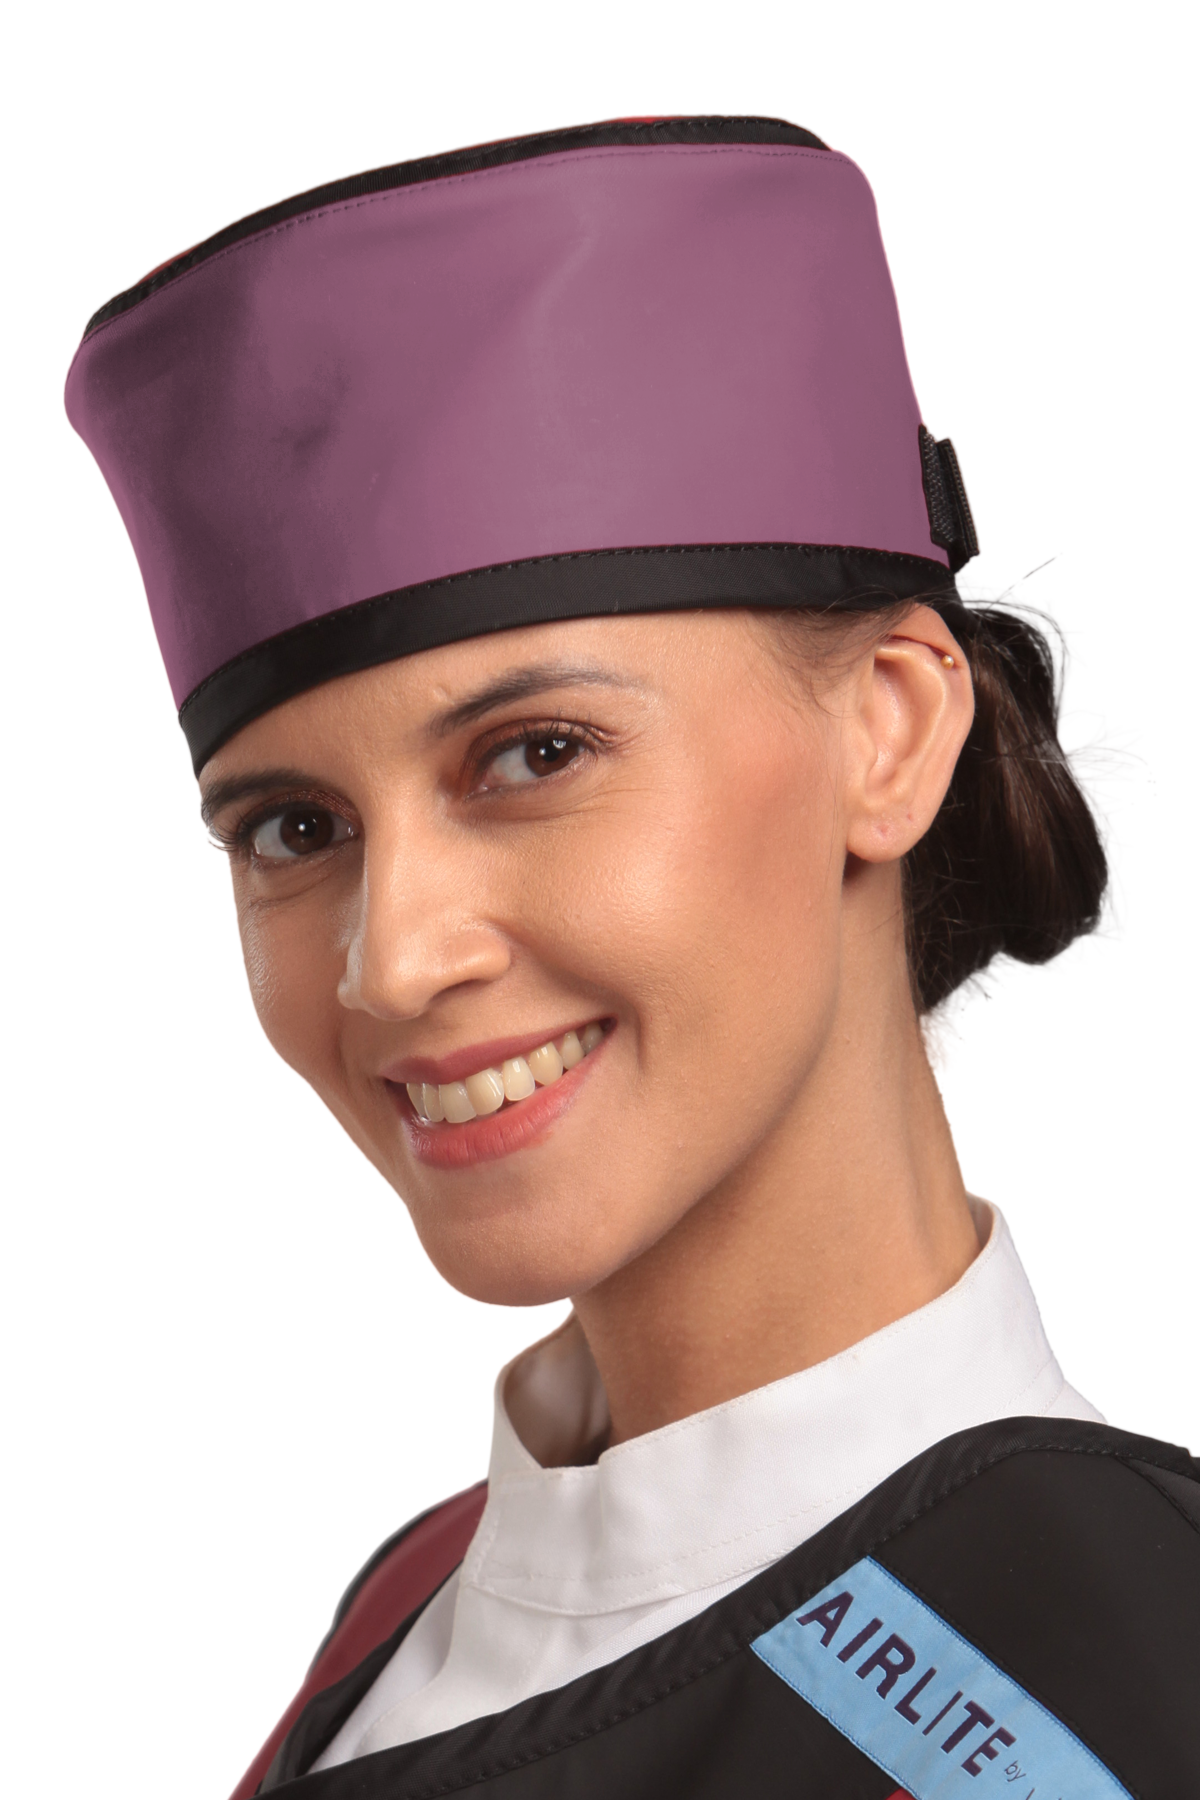 Up-close left-side frontal view of a female model wearing a radiation protection head shield. The head shield is mauve with black-colored lines around the lower and upper edges.